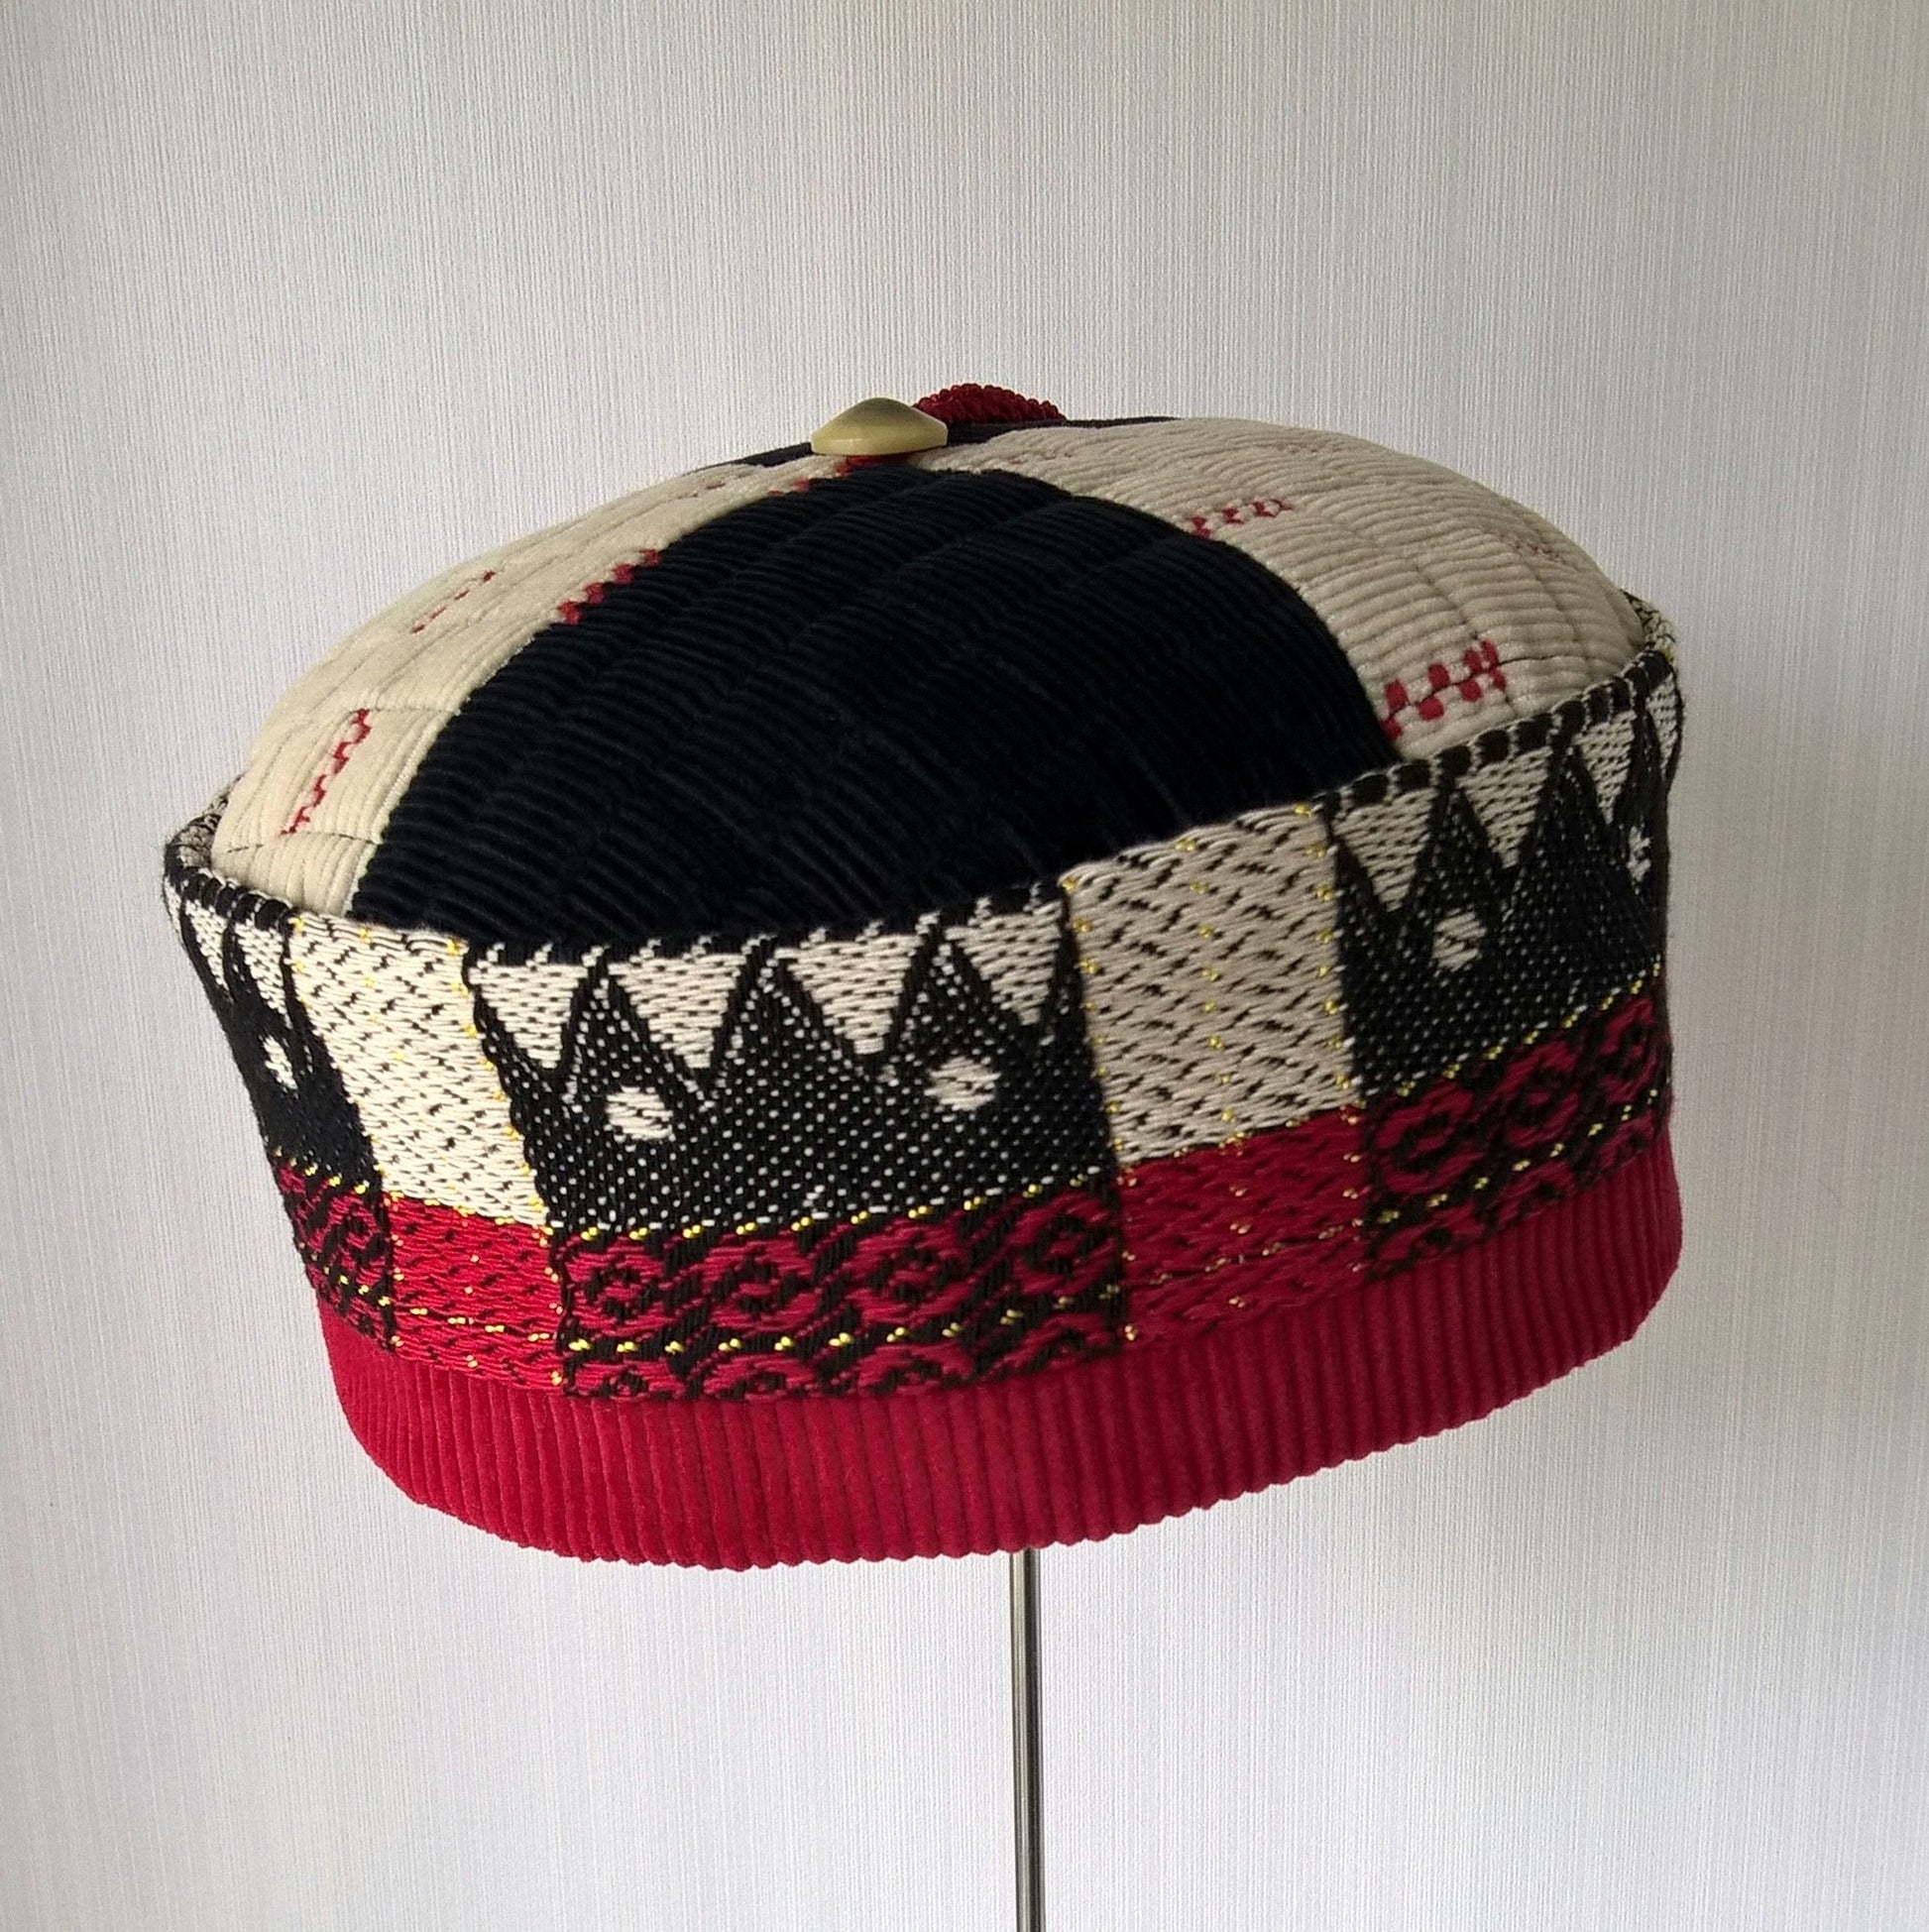 Vintage patterned fabric gives this smoking cap an ethnic feel